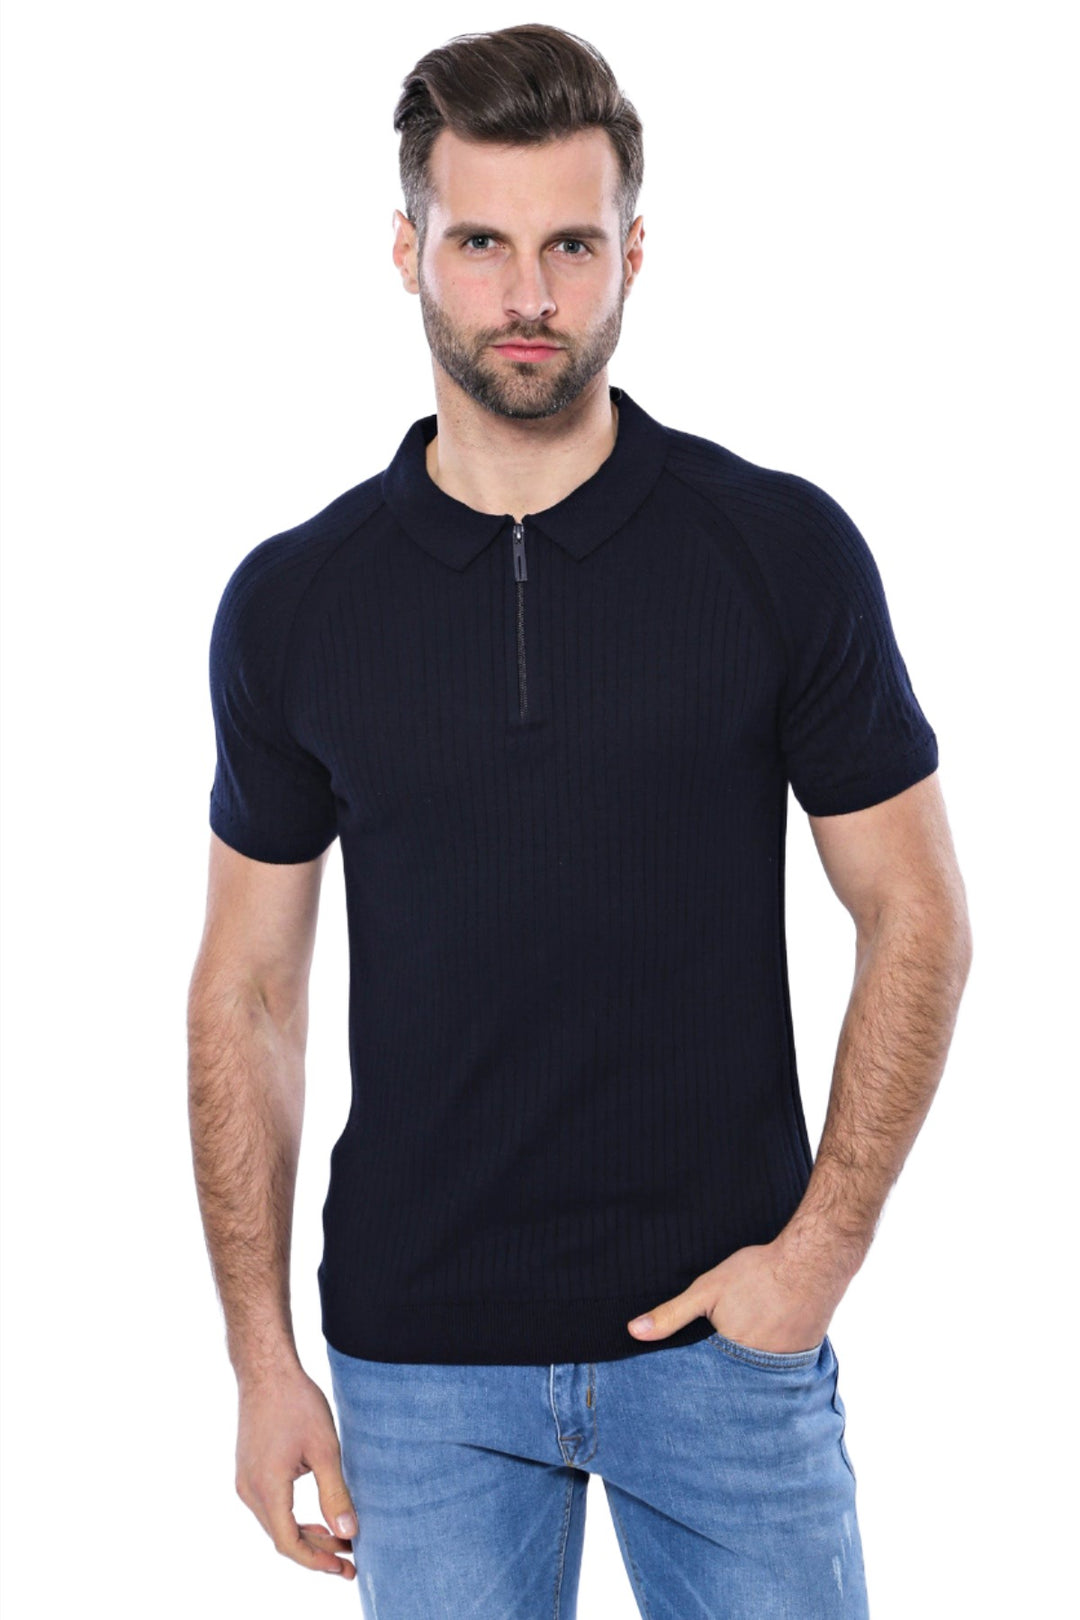 Polo Zippered Patterned Knitted Navy Blue Men T-Shirt - Wessi